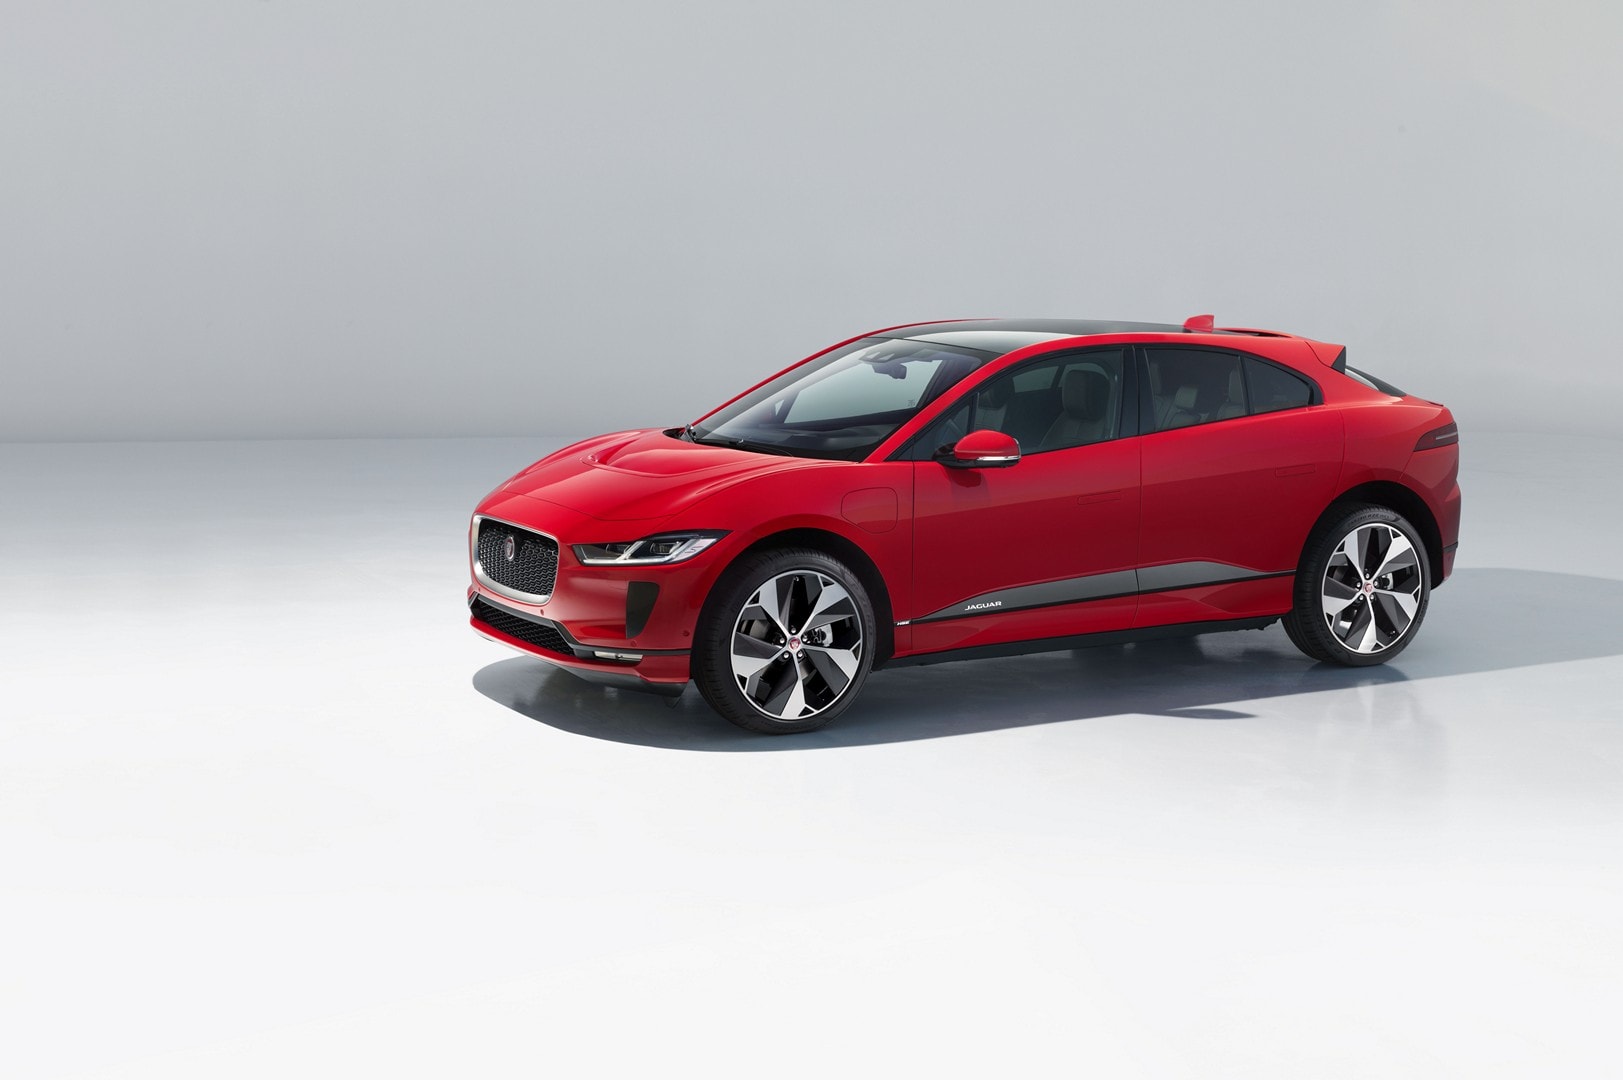 https://s1.cdn.autoevolution.com/images/news/2020-jaguar-i-pace-update-offers-234-miles-of-range-thanks-to-etrophy-know-how-139623_1.jpg